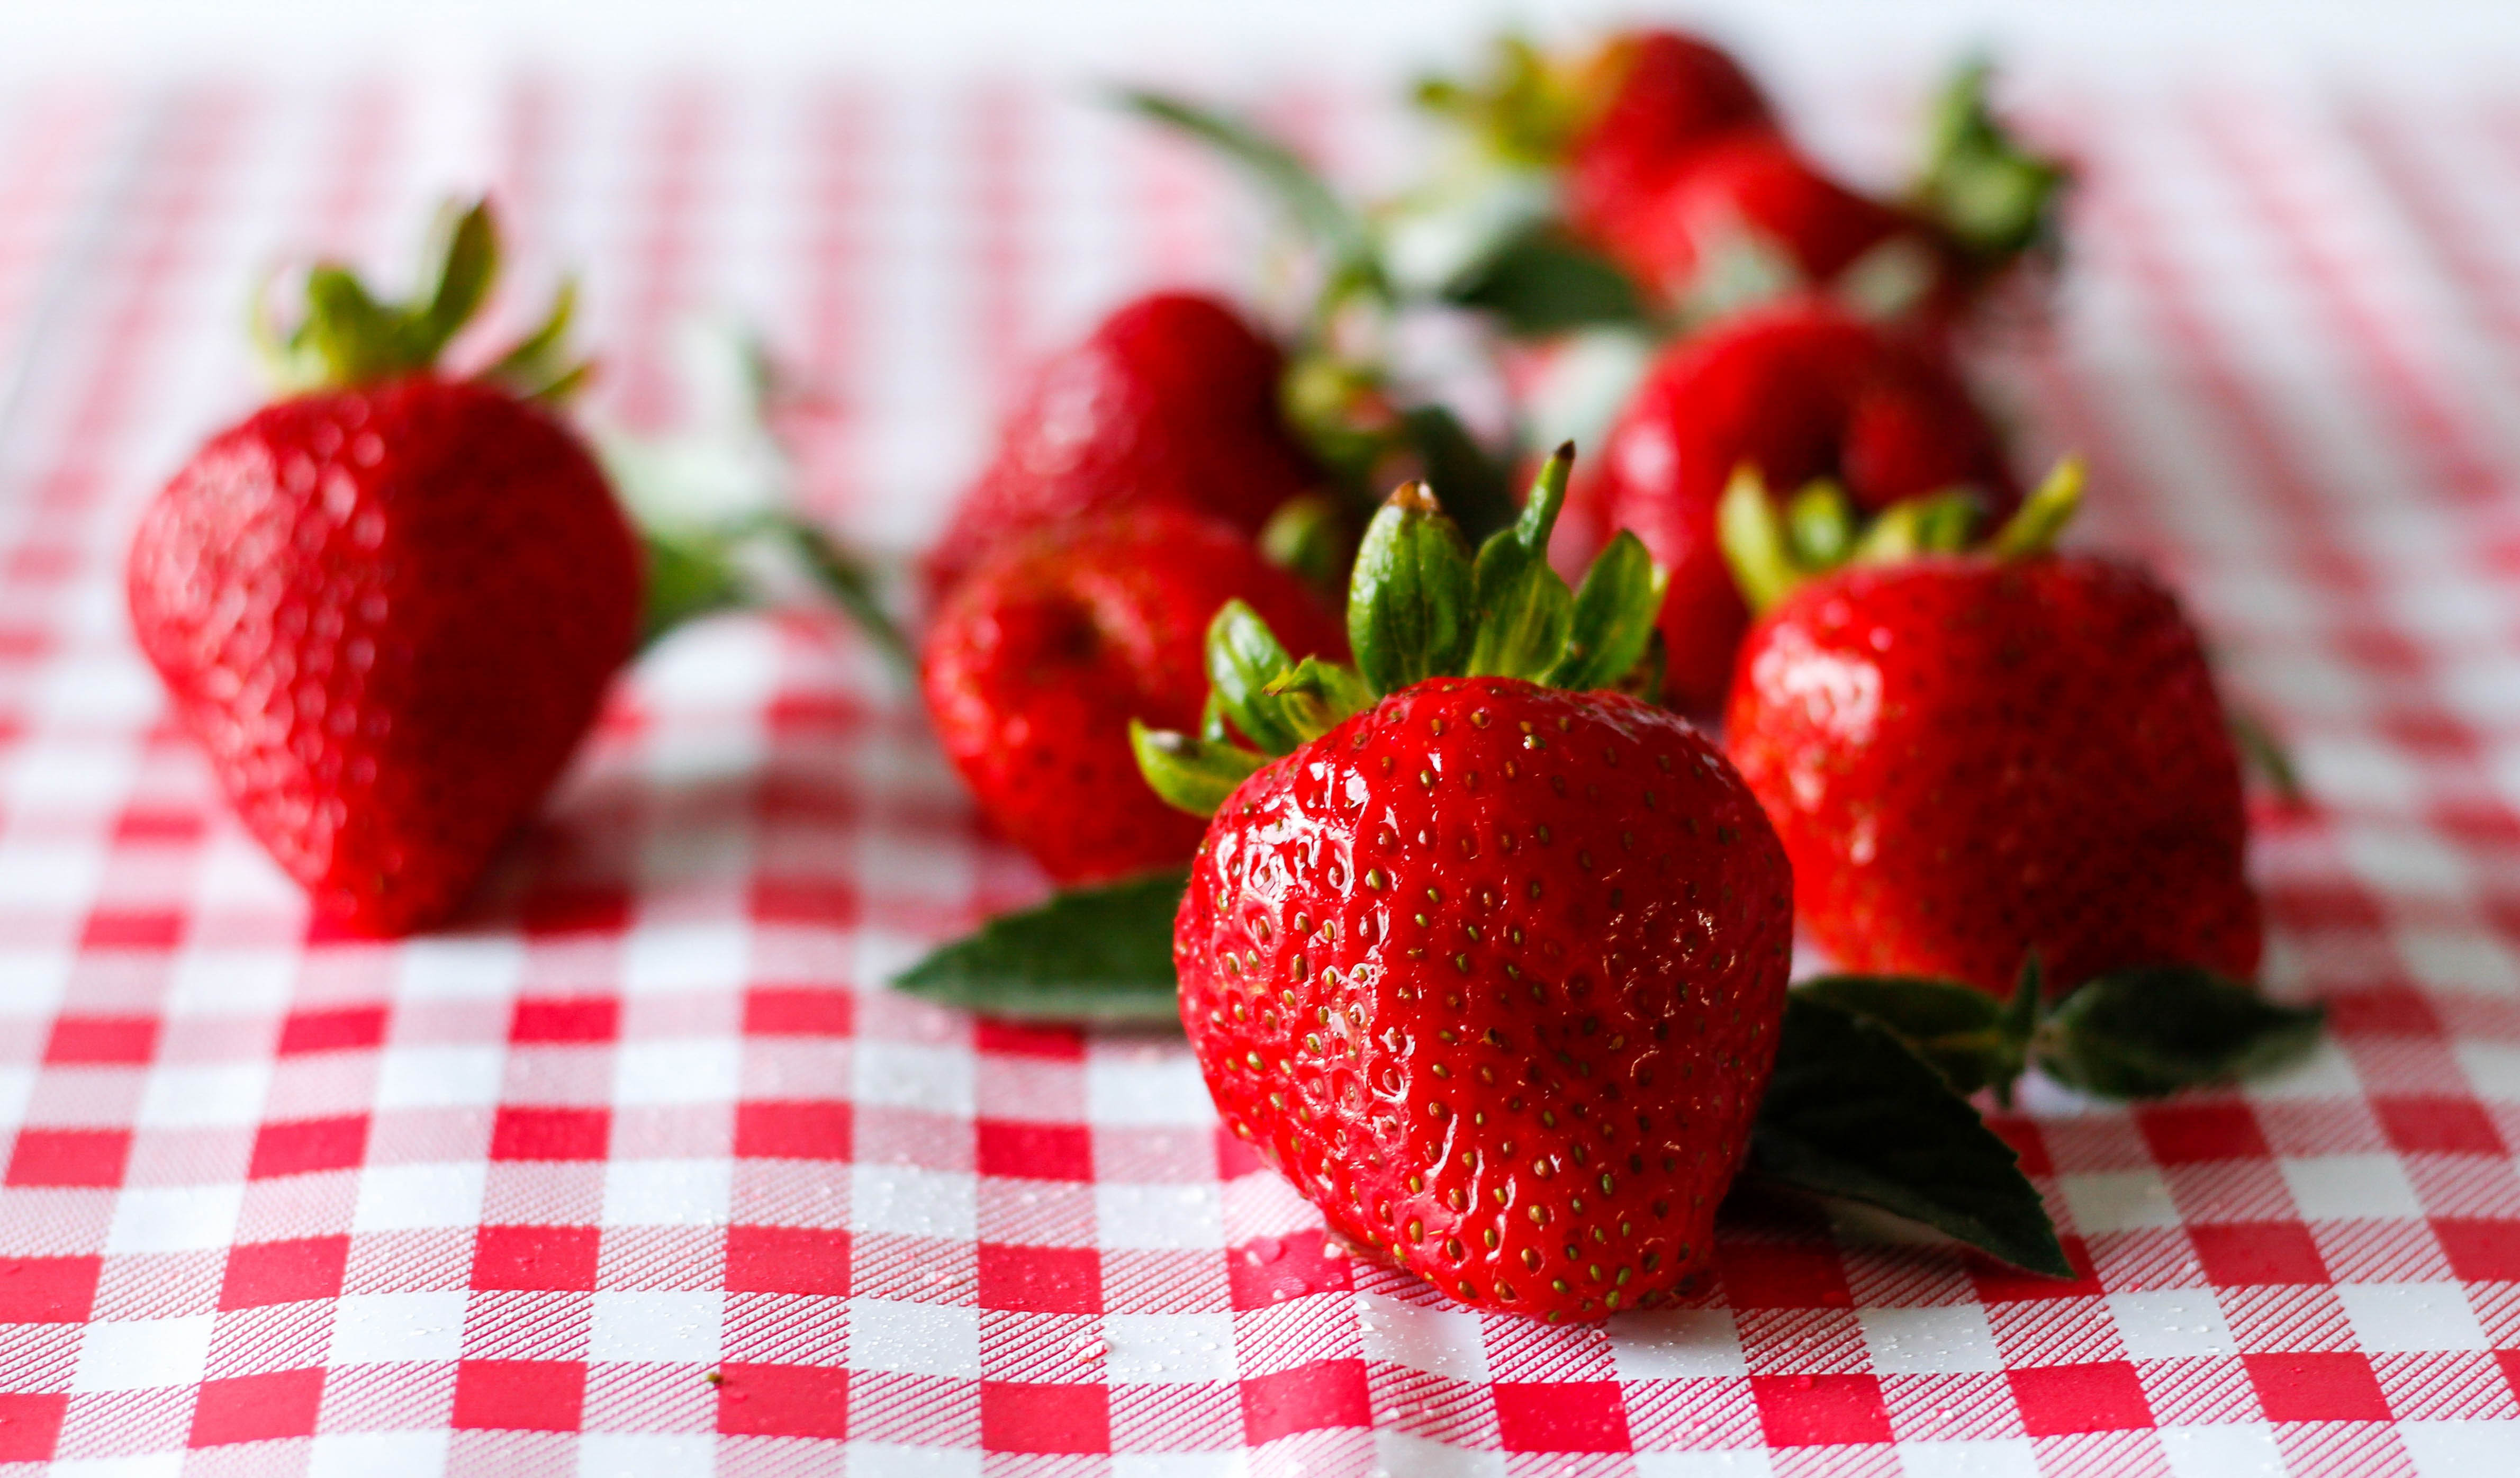 118060 Screensavers and Wallpapers Berry for phone. Download food, strawberry, red, berry, ripe, juicy pictures for free